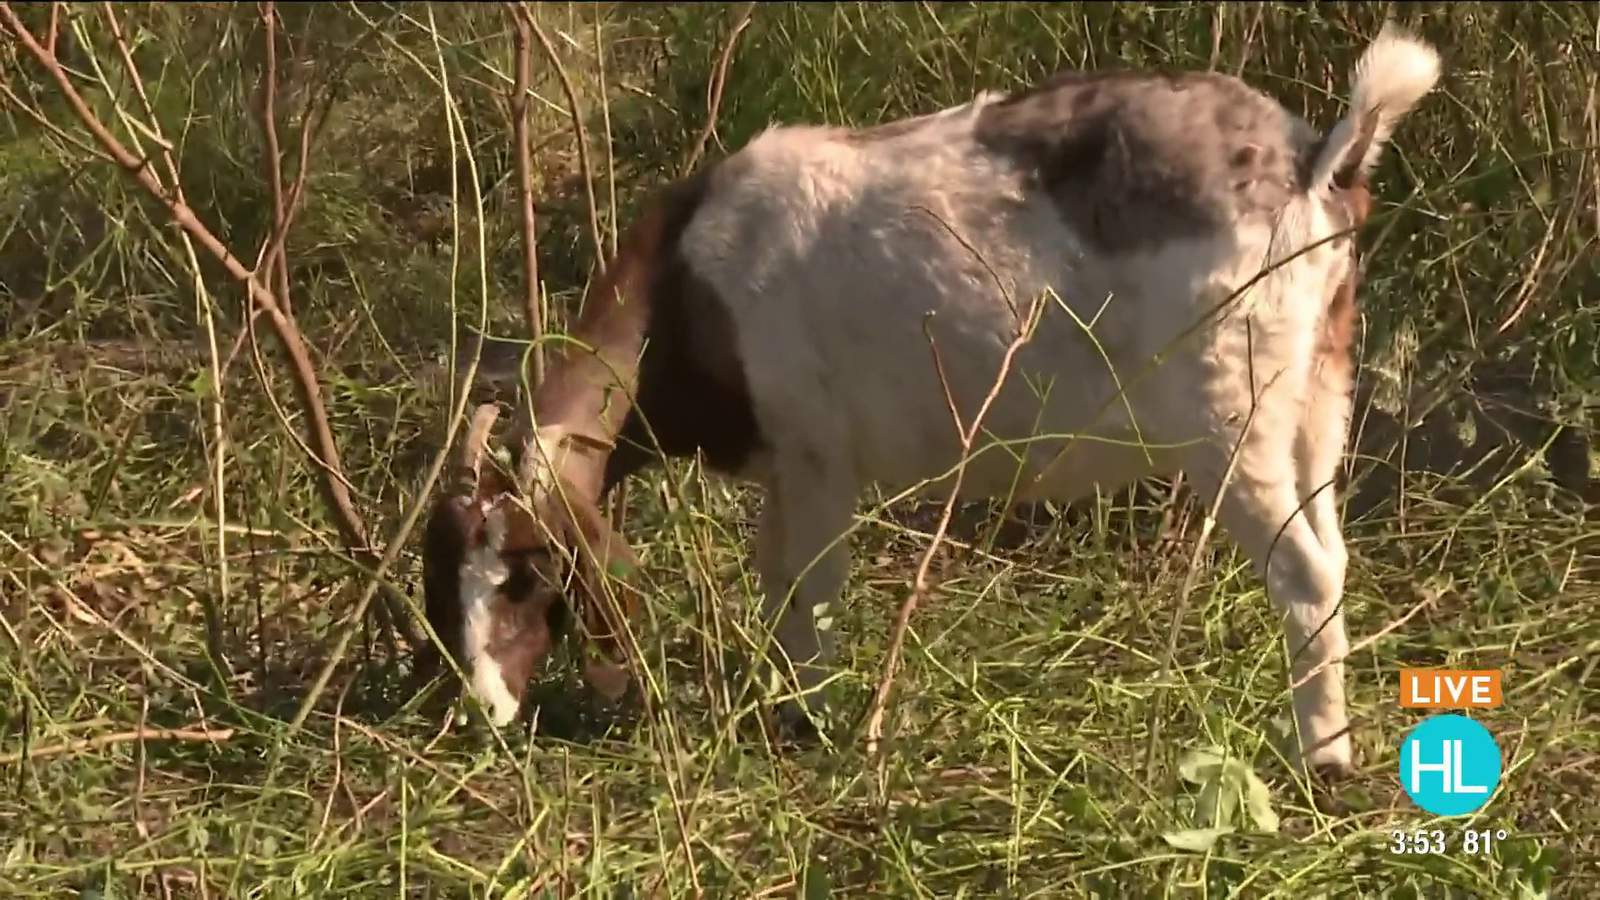 Watch over 120 live goats “work” at the Houston Arboretum & Nature Center this week